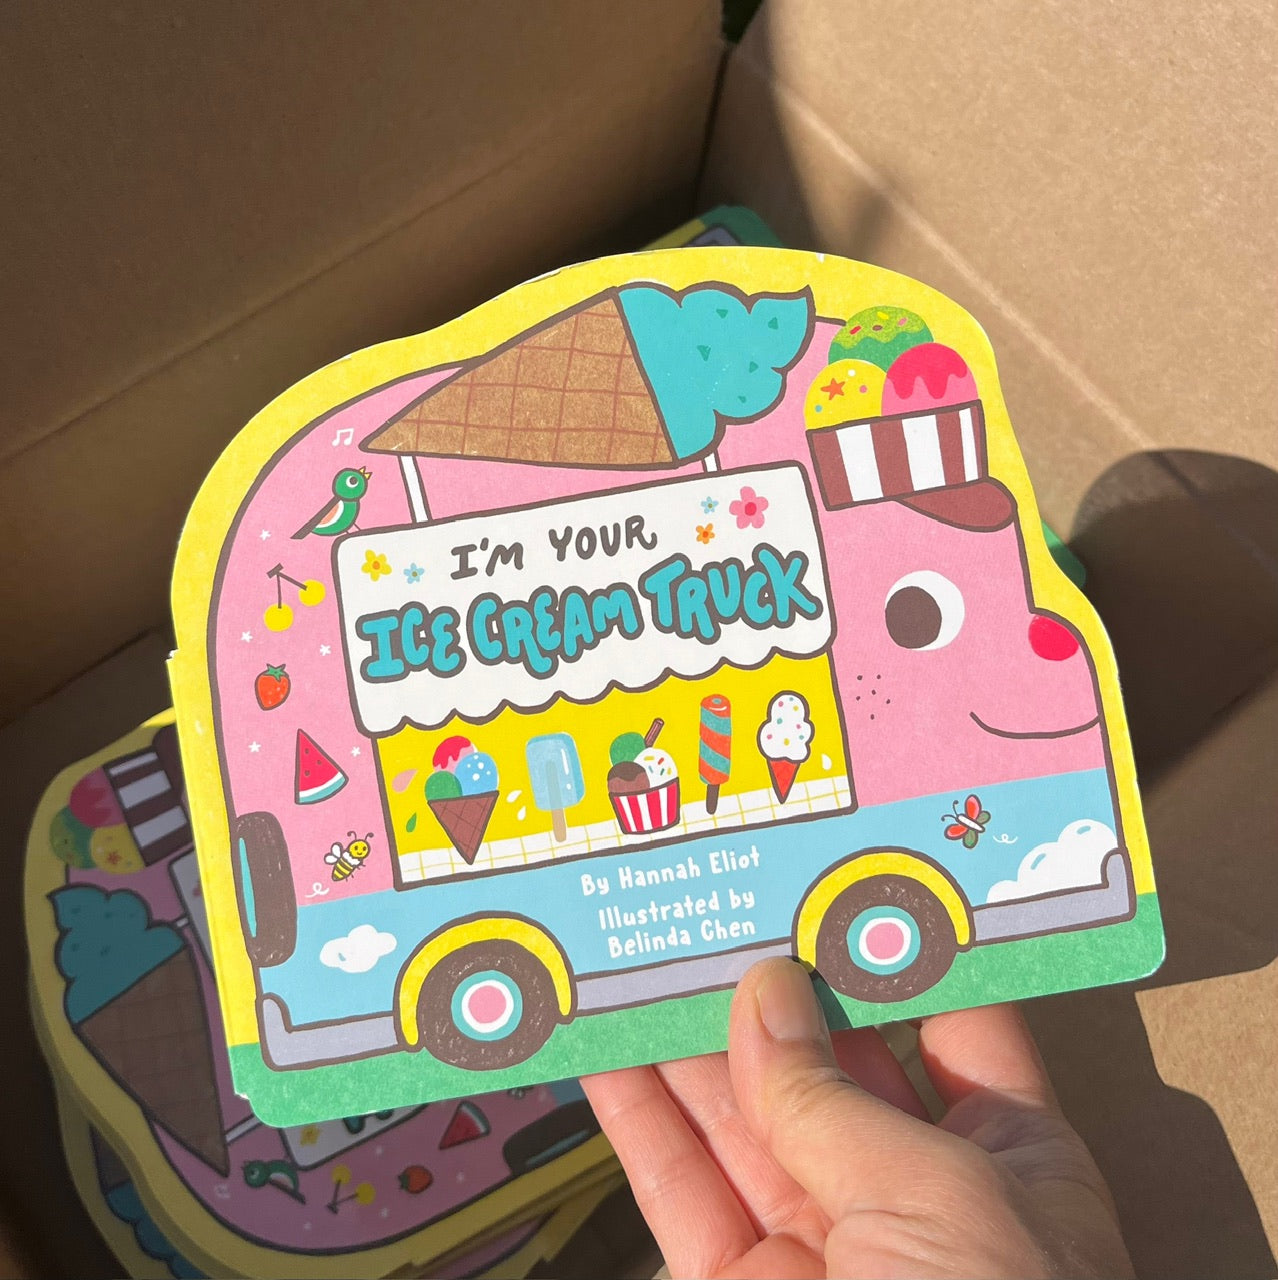 I am your ice cream truck- signed copy